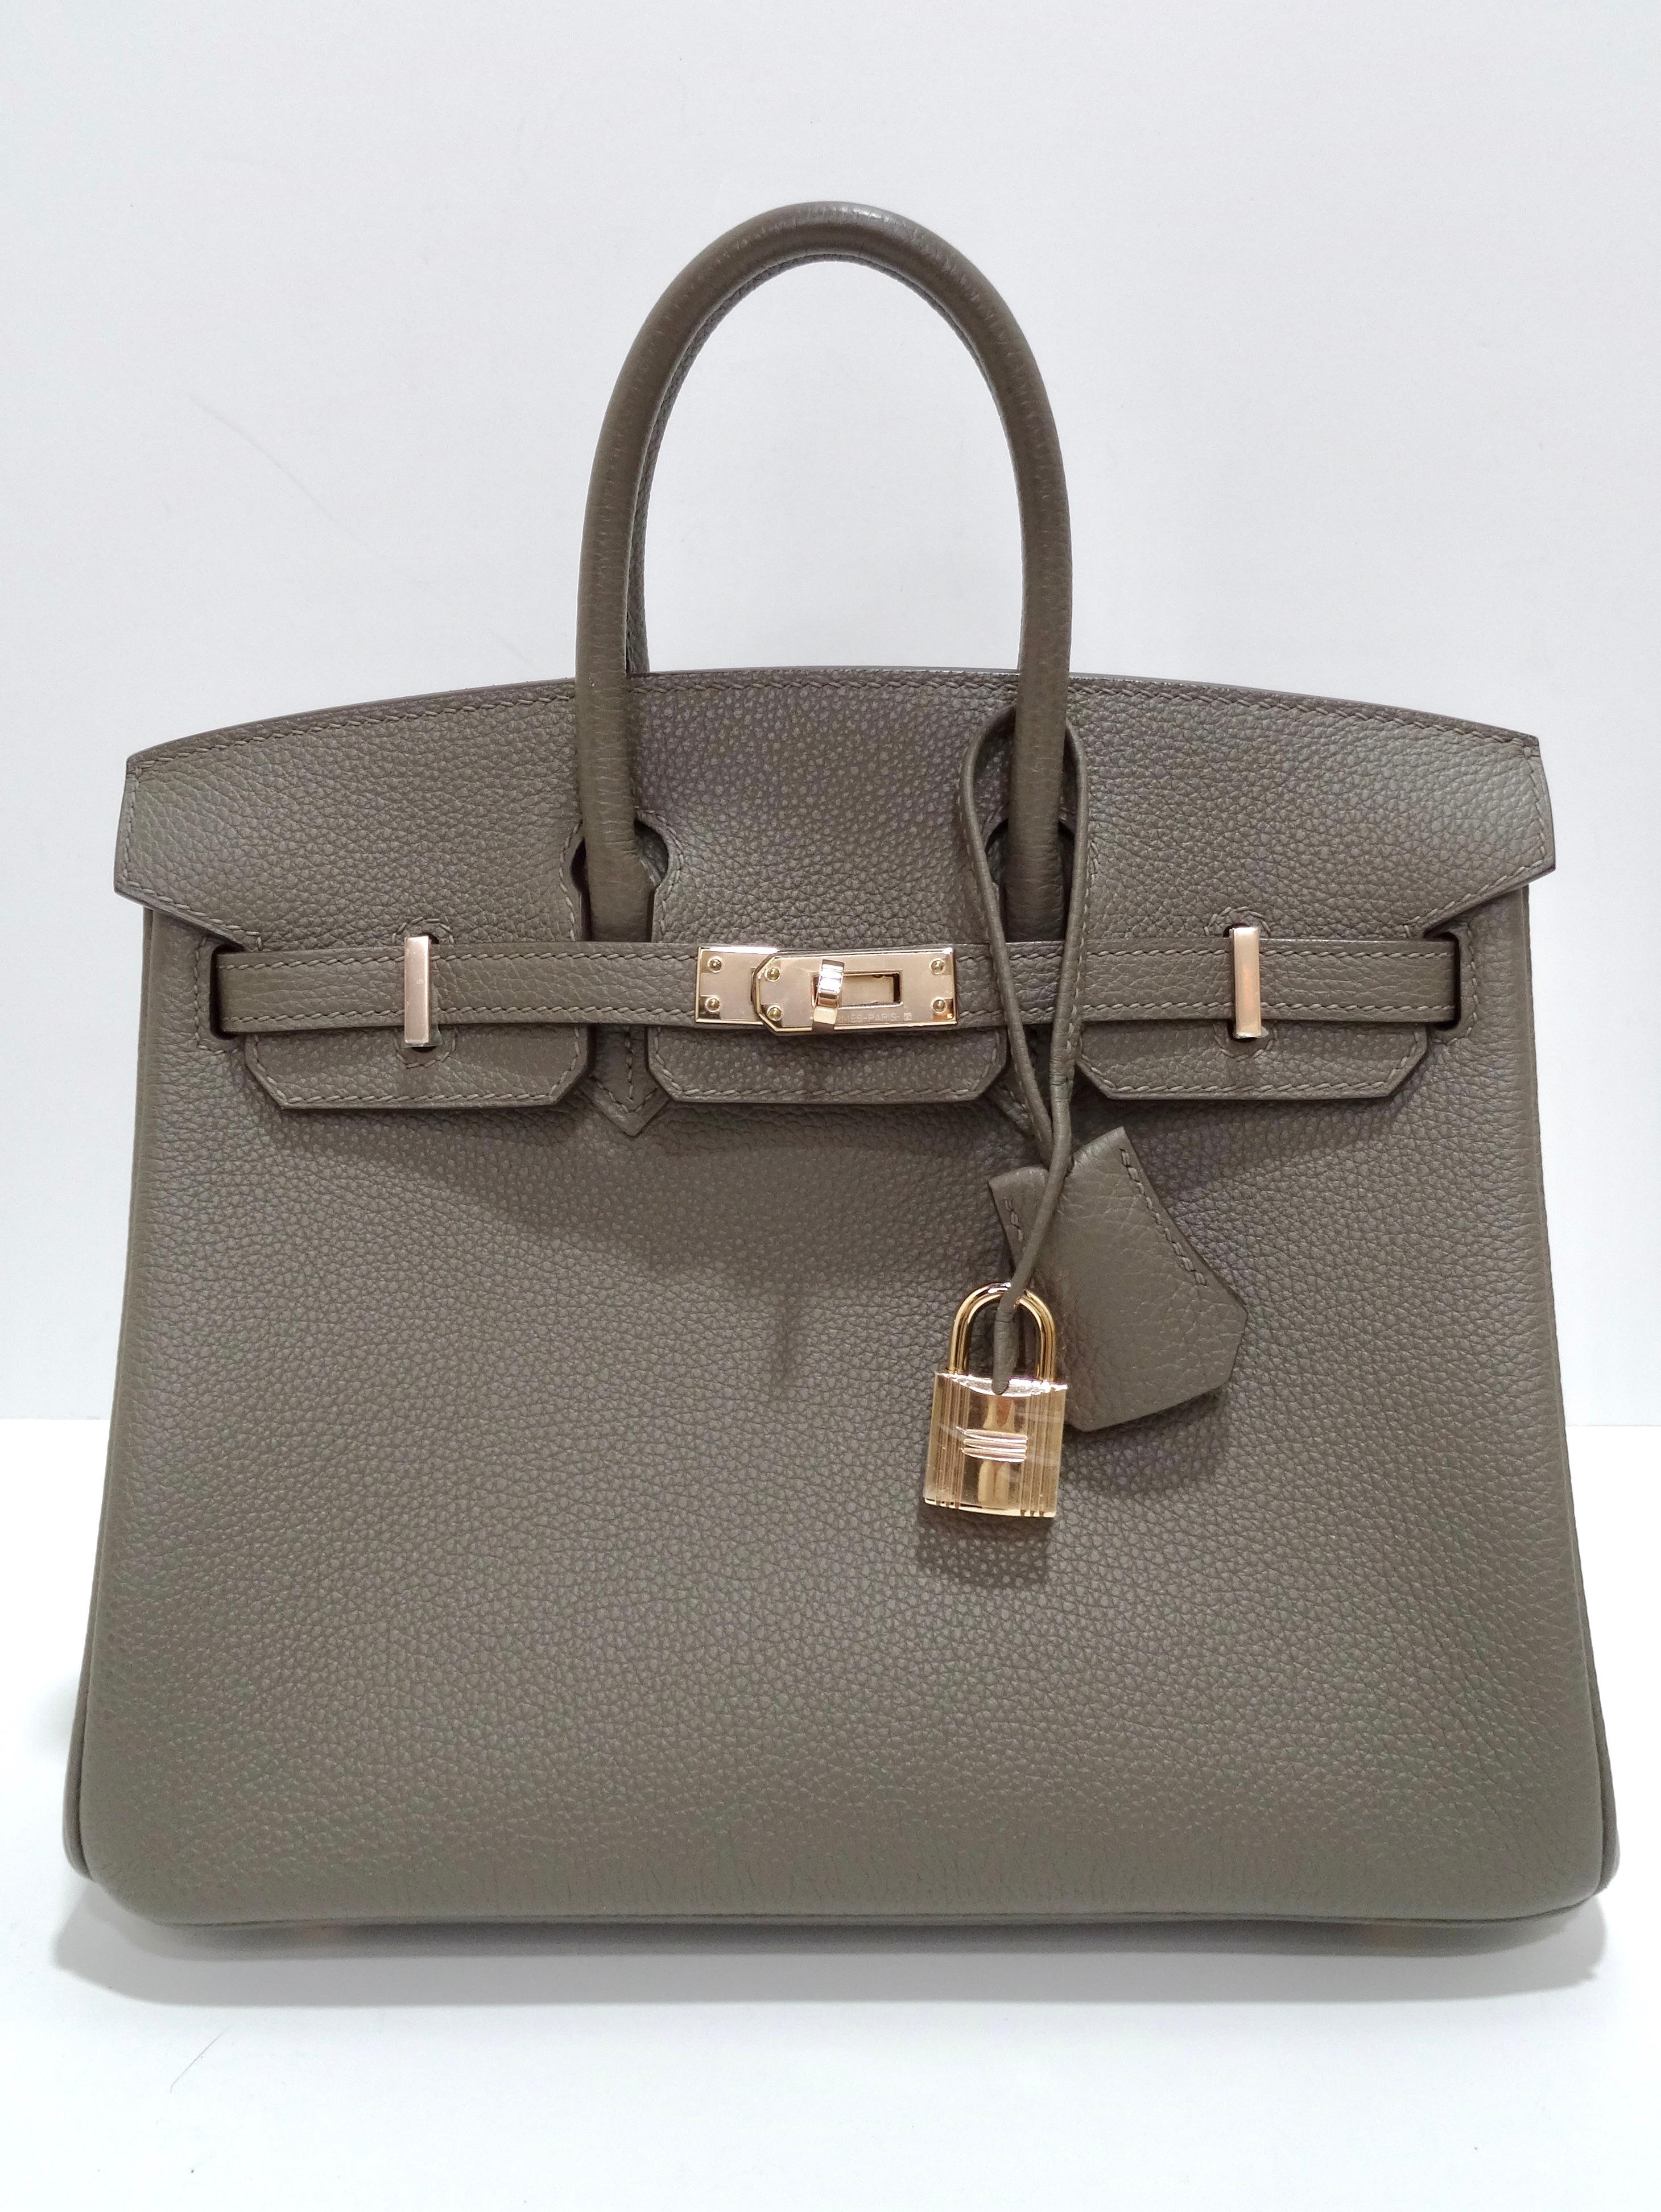 Hermès Togo Birkin 25cm Etain is hard to get your hands on. Seize it while you can! This petite handbag is beautifully crafted of togo calfskin leather in grey. The bag features rolled leather top handles, a short front flap, strap closure and rose